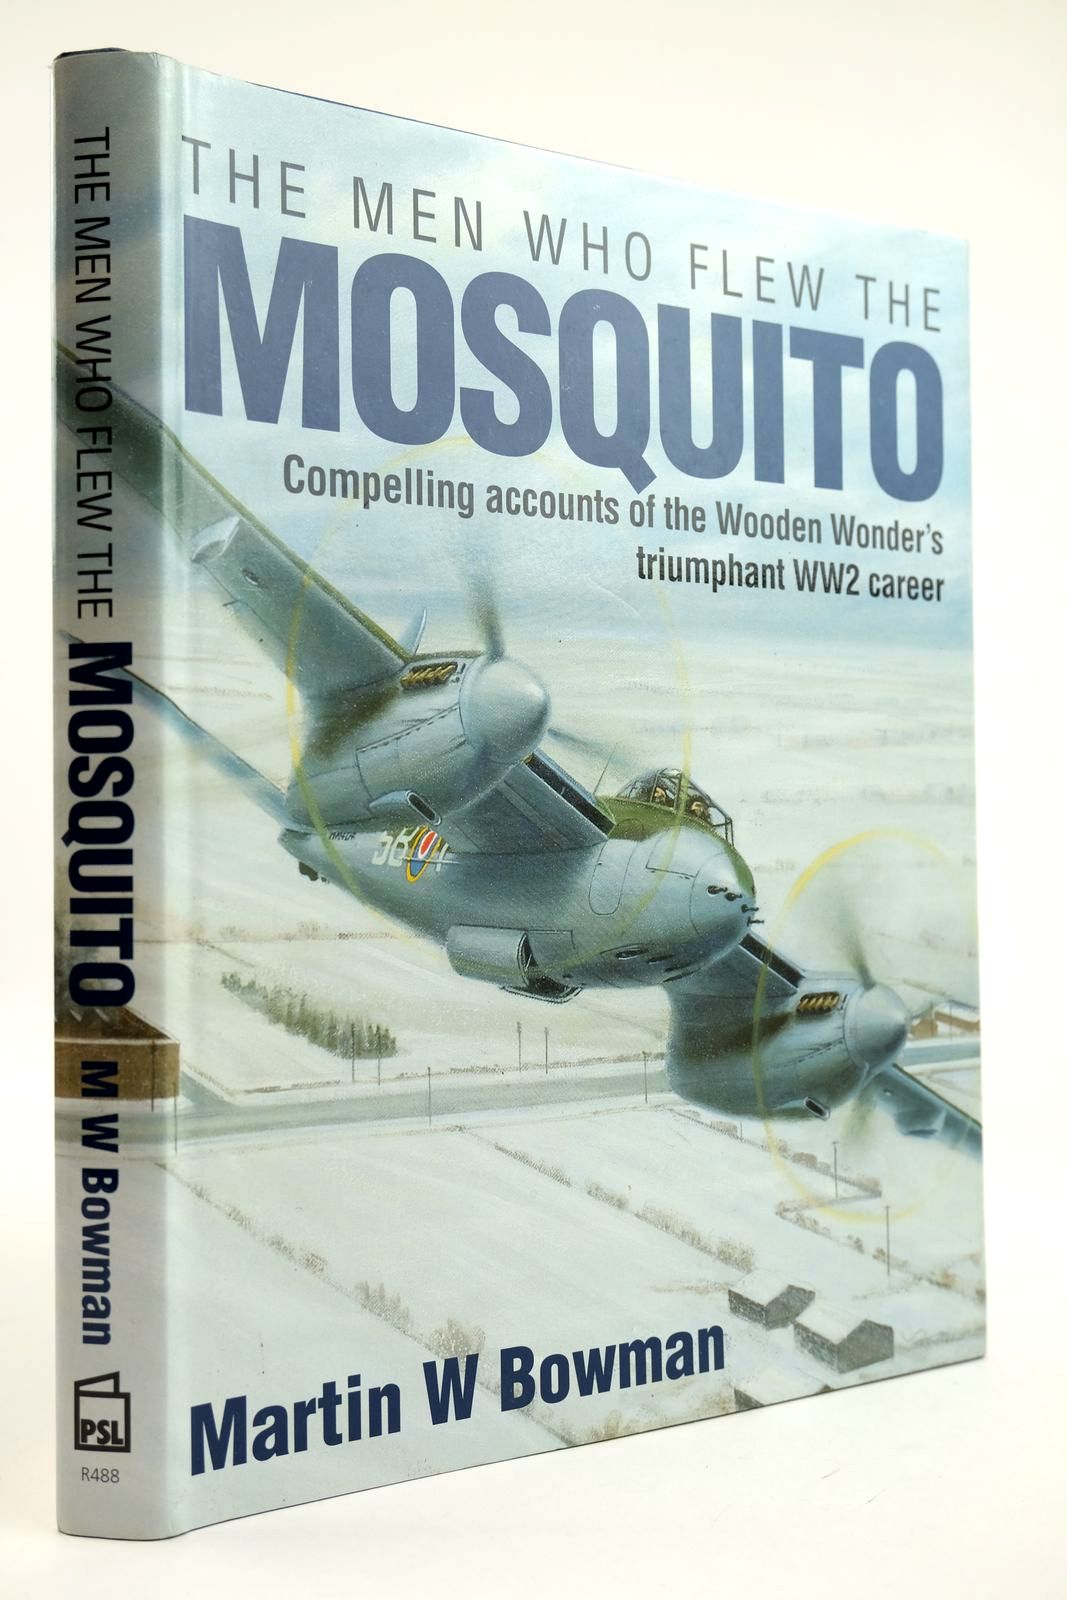 Photo of THE MEN WHO FLEW THE MOSQUITO written by Bowman, Martin W. published by Patrick Stephens Limited (STOCK CODE: 2132162)  for sale by Stella & Rose's Books